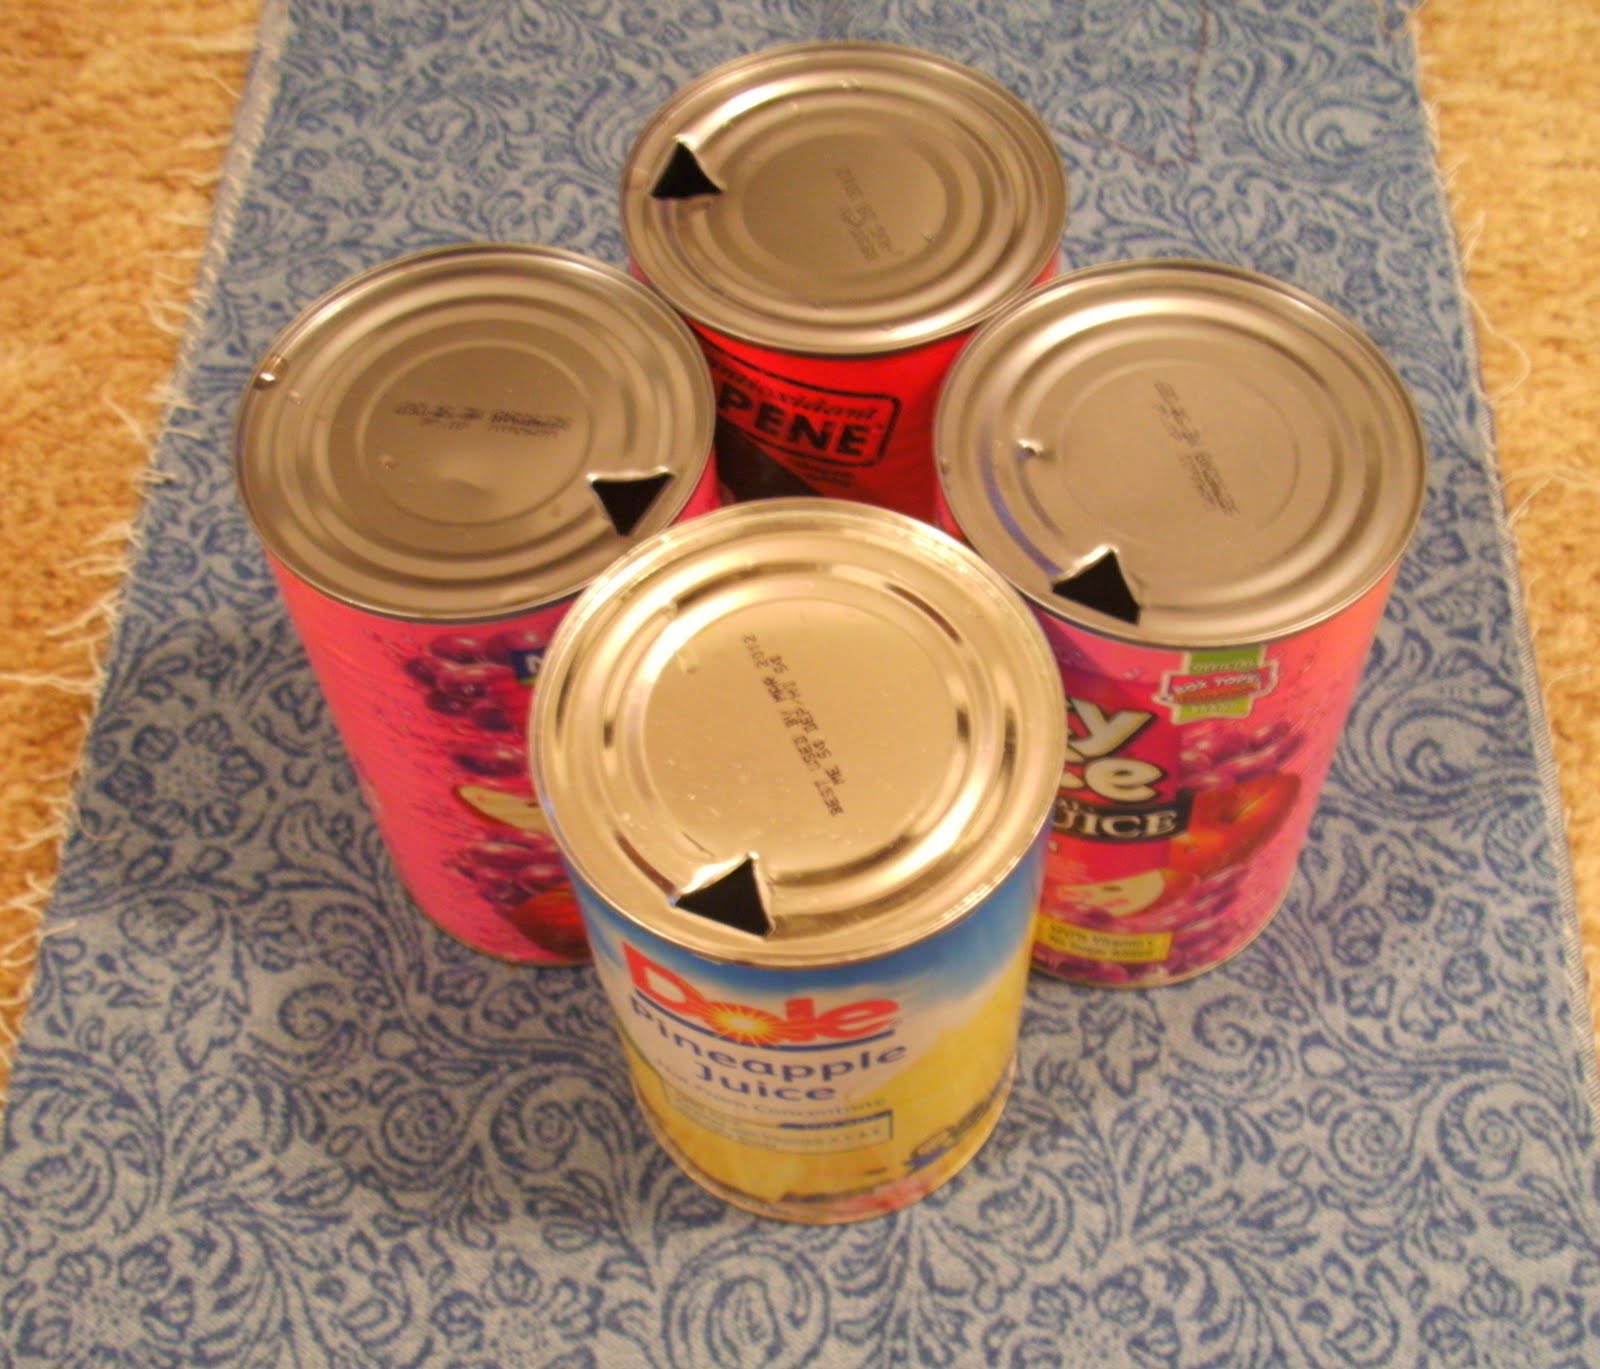 Put the juice cans together